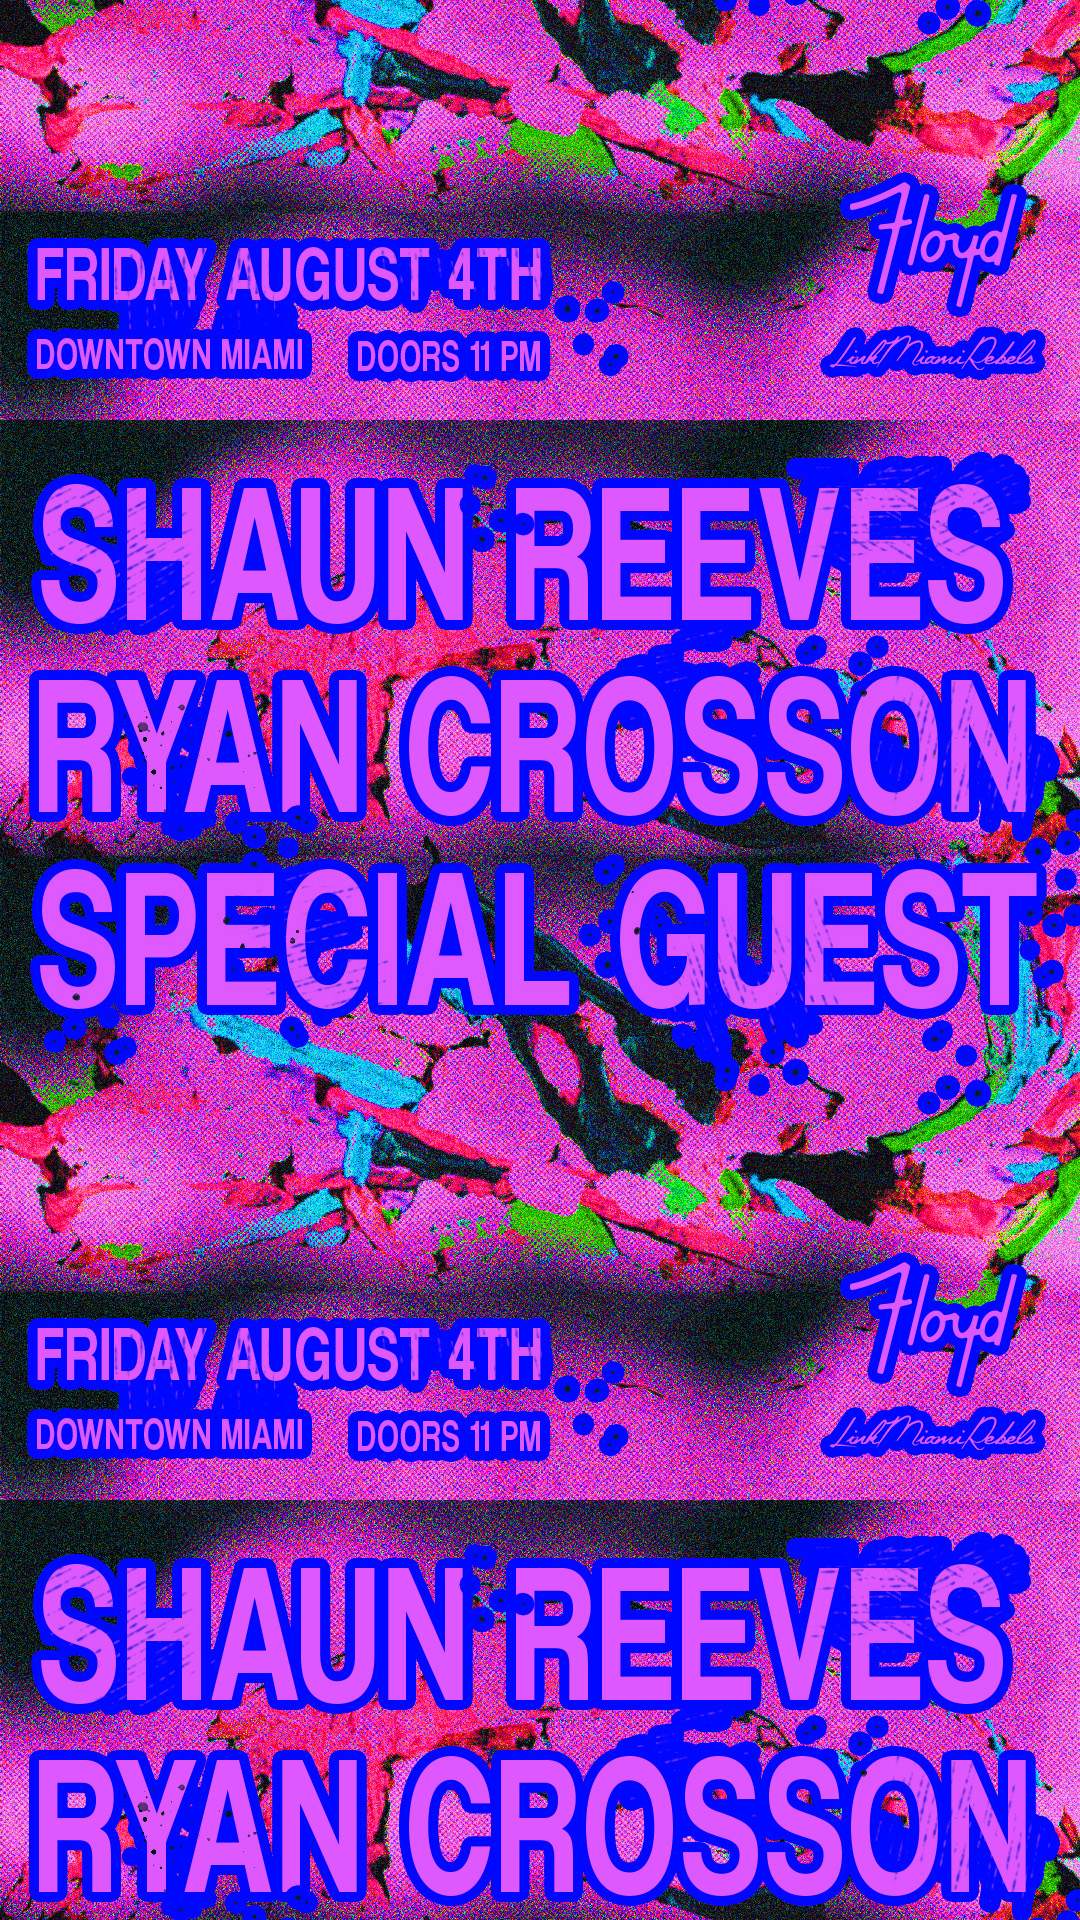 Shaun Reeves, Ryan Crosson + Special Guest - フライヤー表